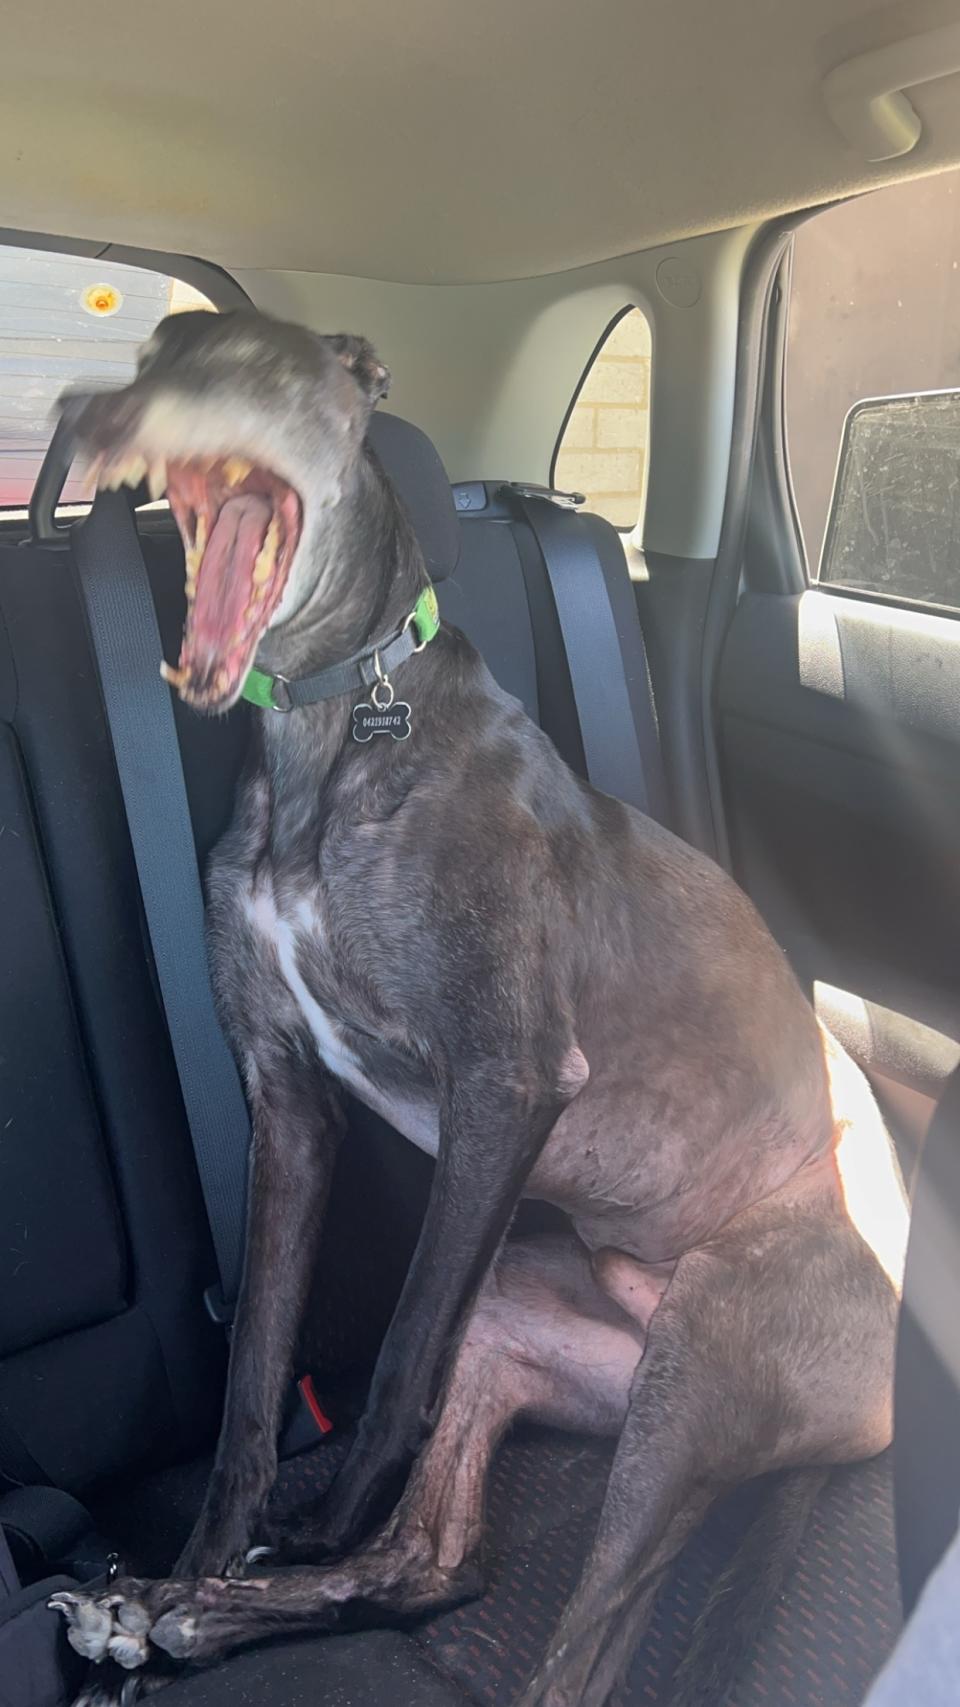 Dog sitting on a car seat mouth wide open in a yawn